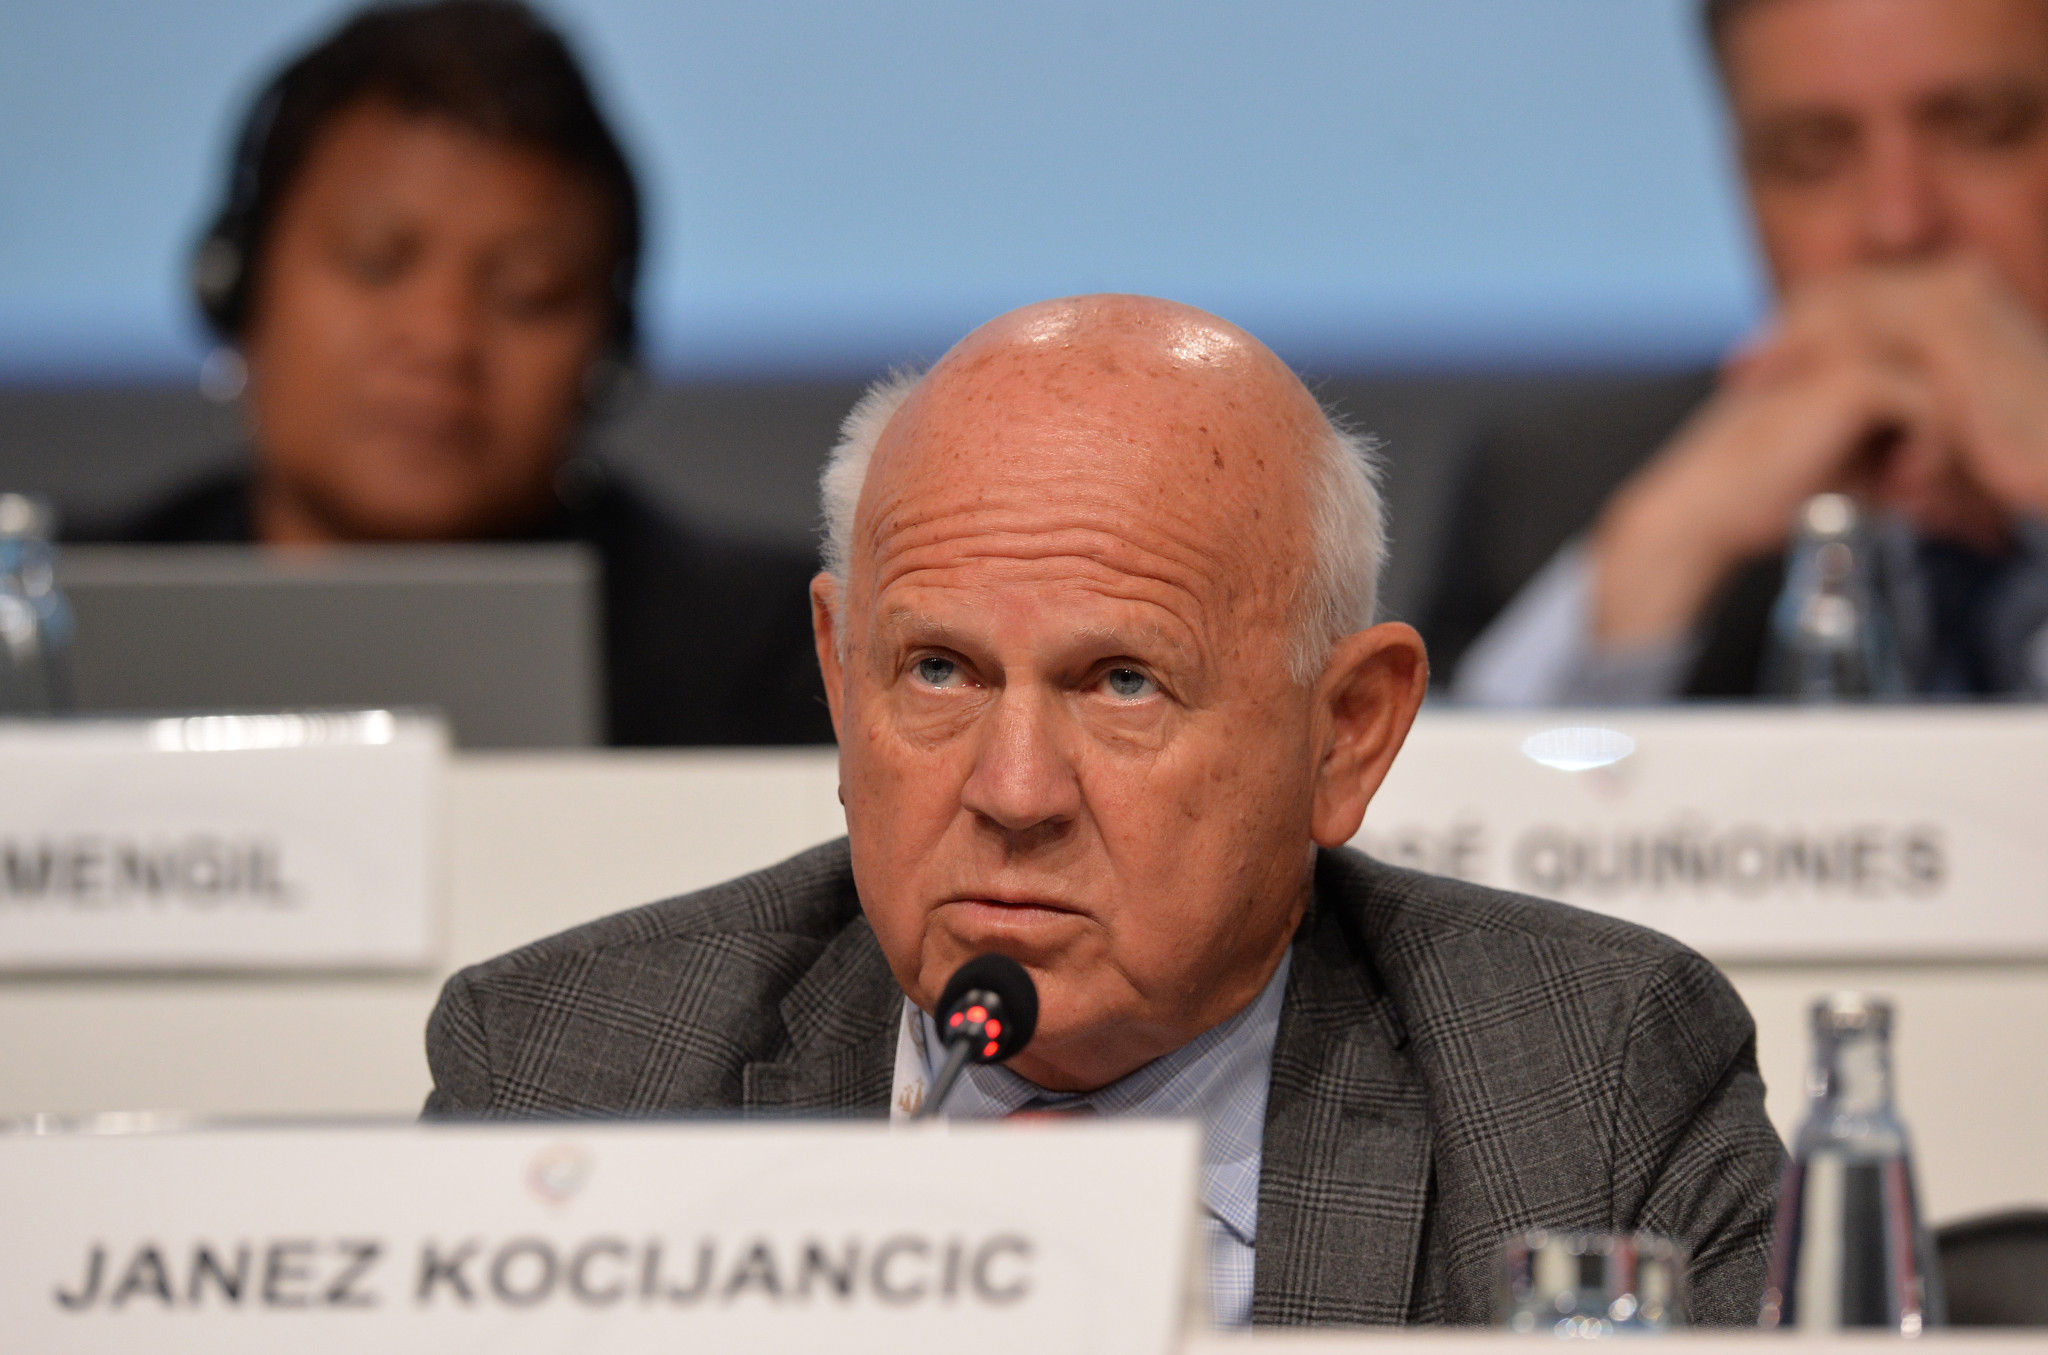 Janez Kocijančič is set to be elected unopposed as permanent EOC President ©Getty Images